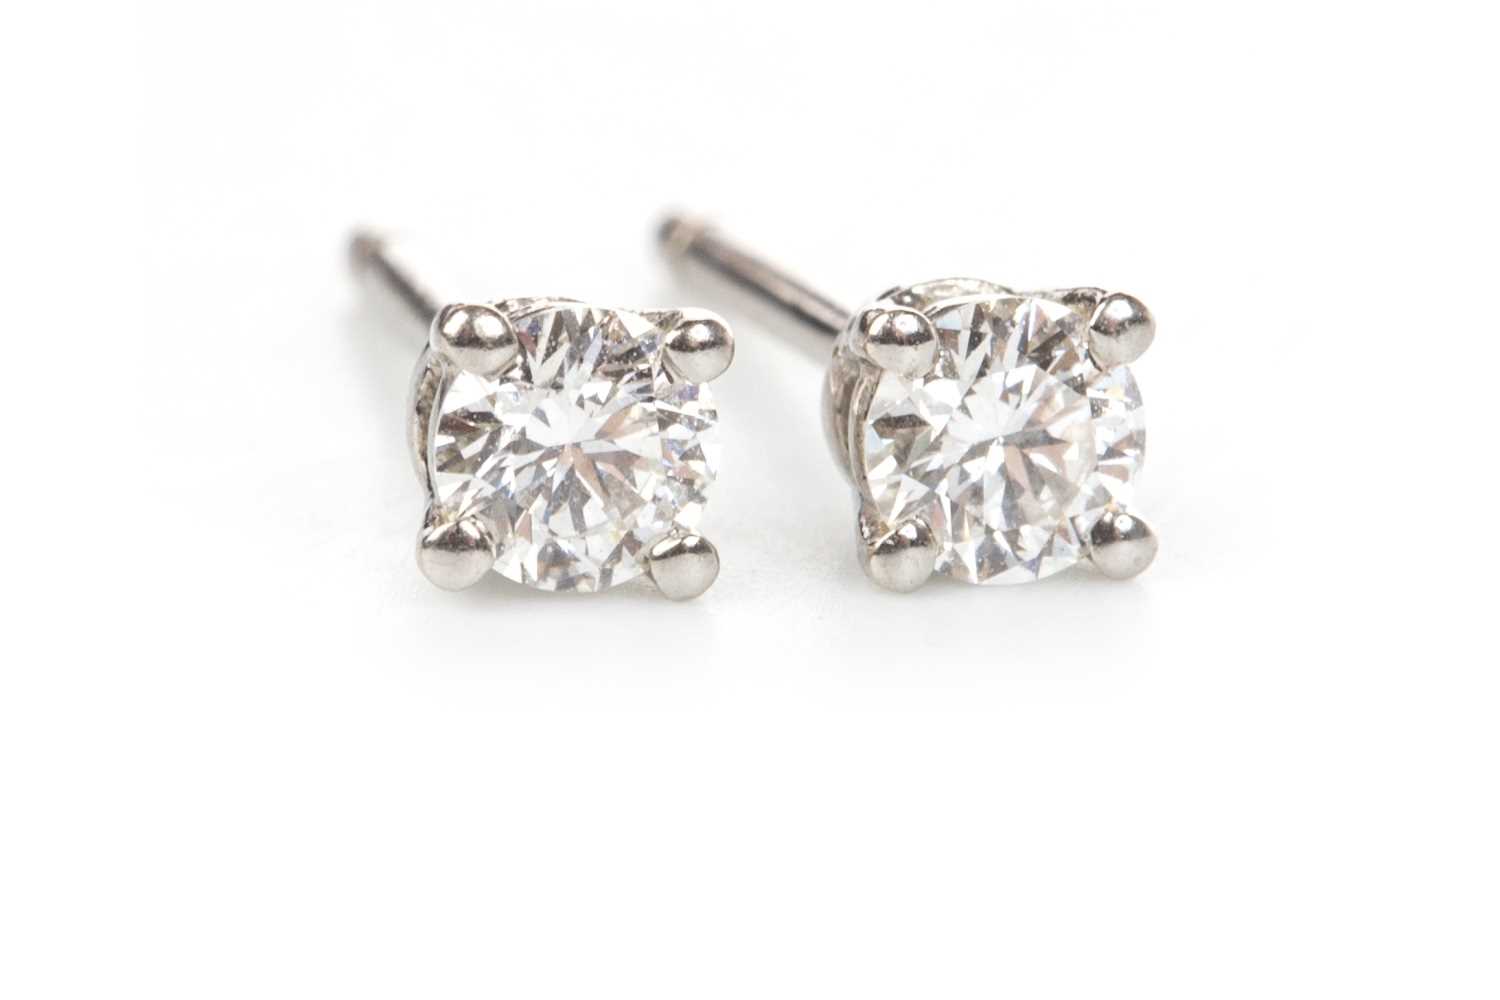 Lot 94 - A PAIR OF TIFFANY AND CO. DIAMOND STUD EARRINGS